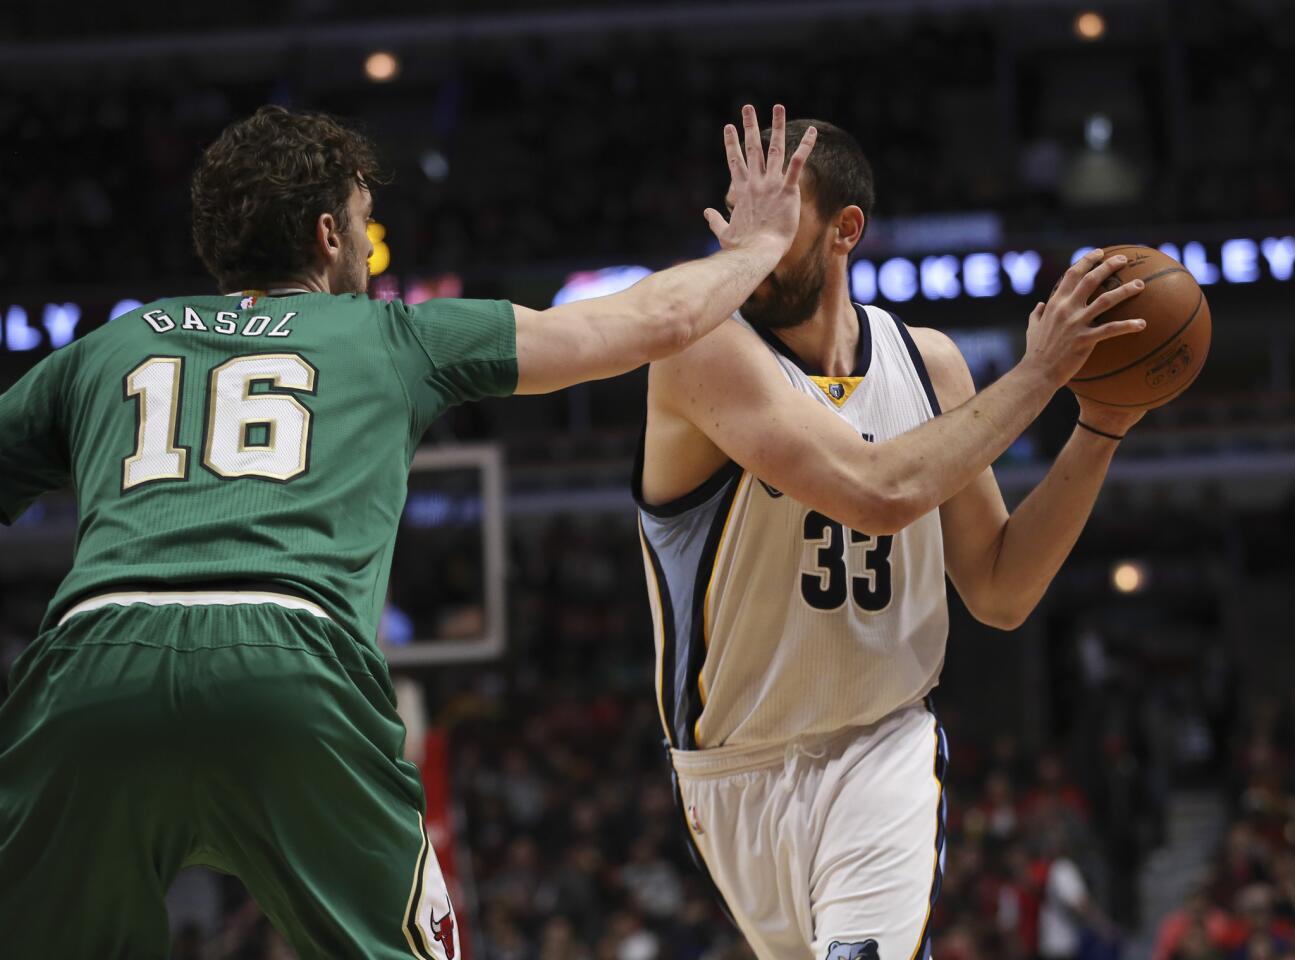 Pau Gasol tries to block the view of Grizzlies center Marc Gasol during the second half.